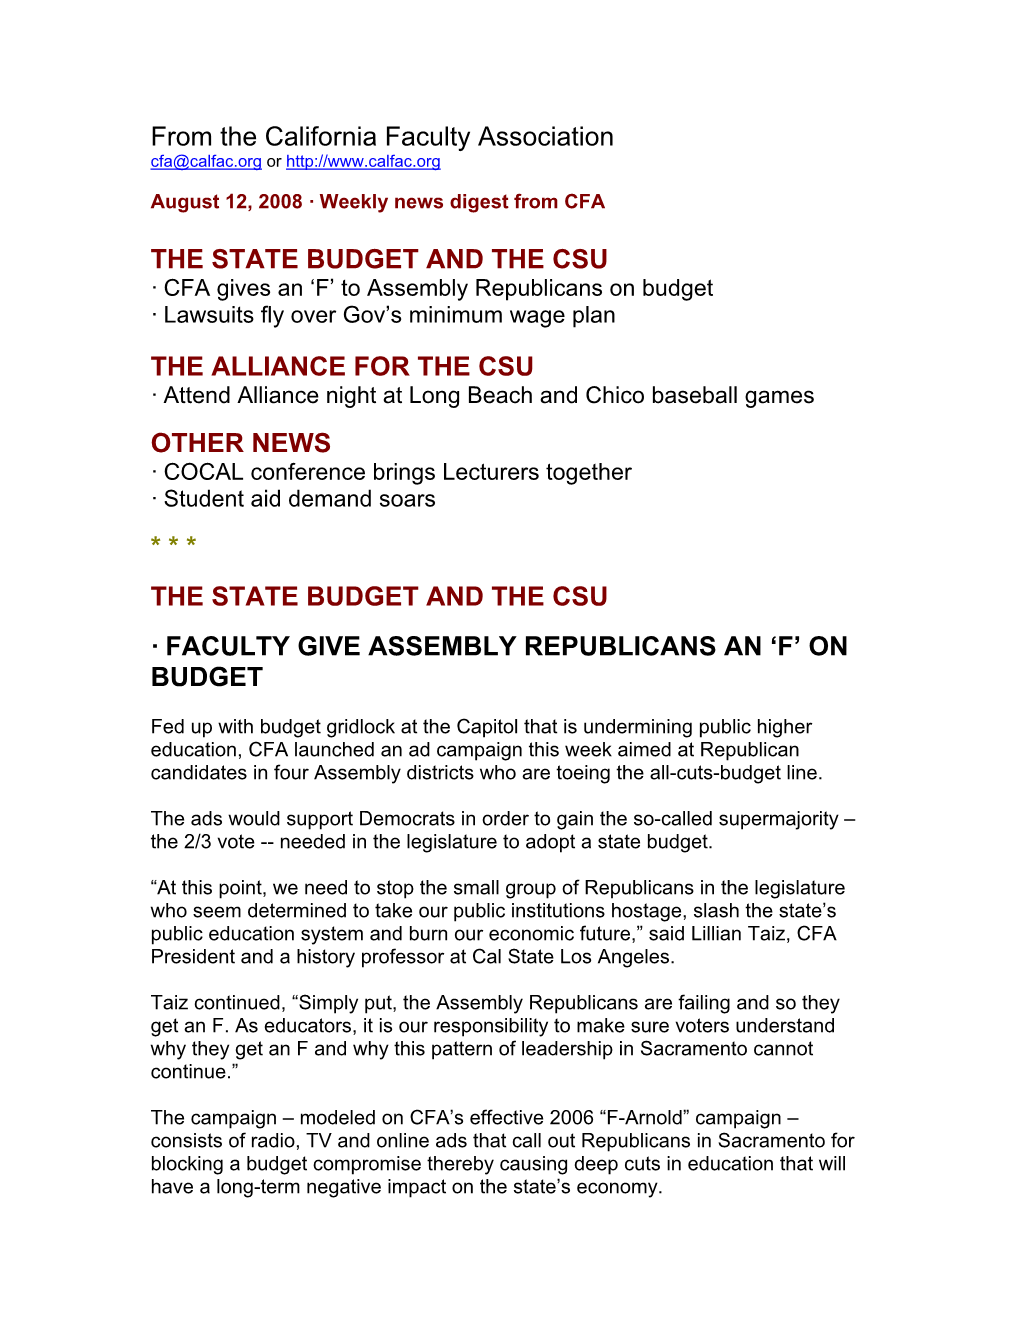 From the California Faculty Association the STATE BUDGET